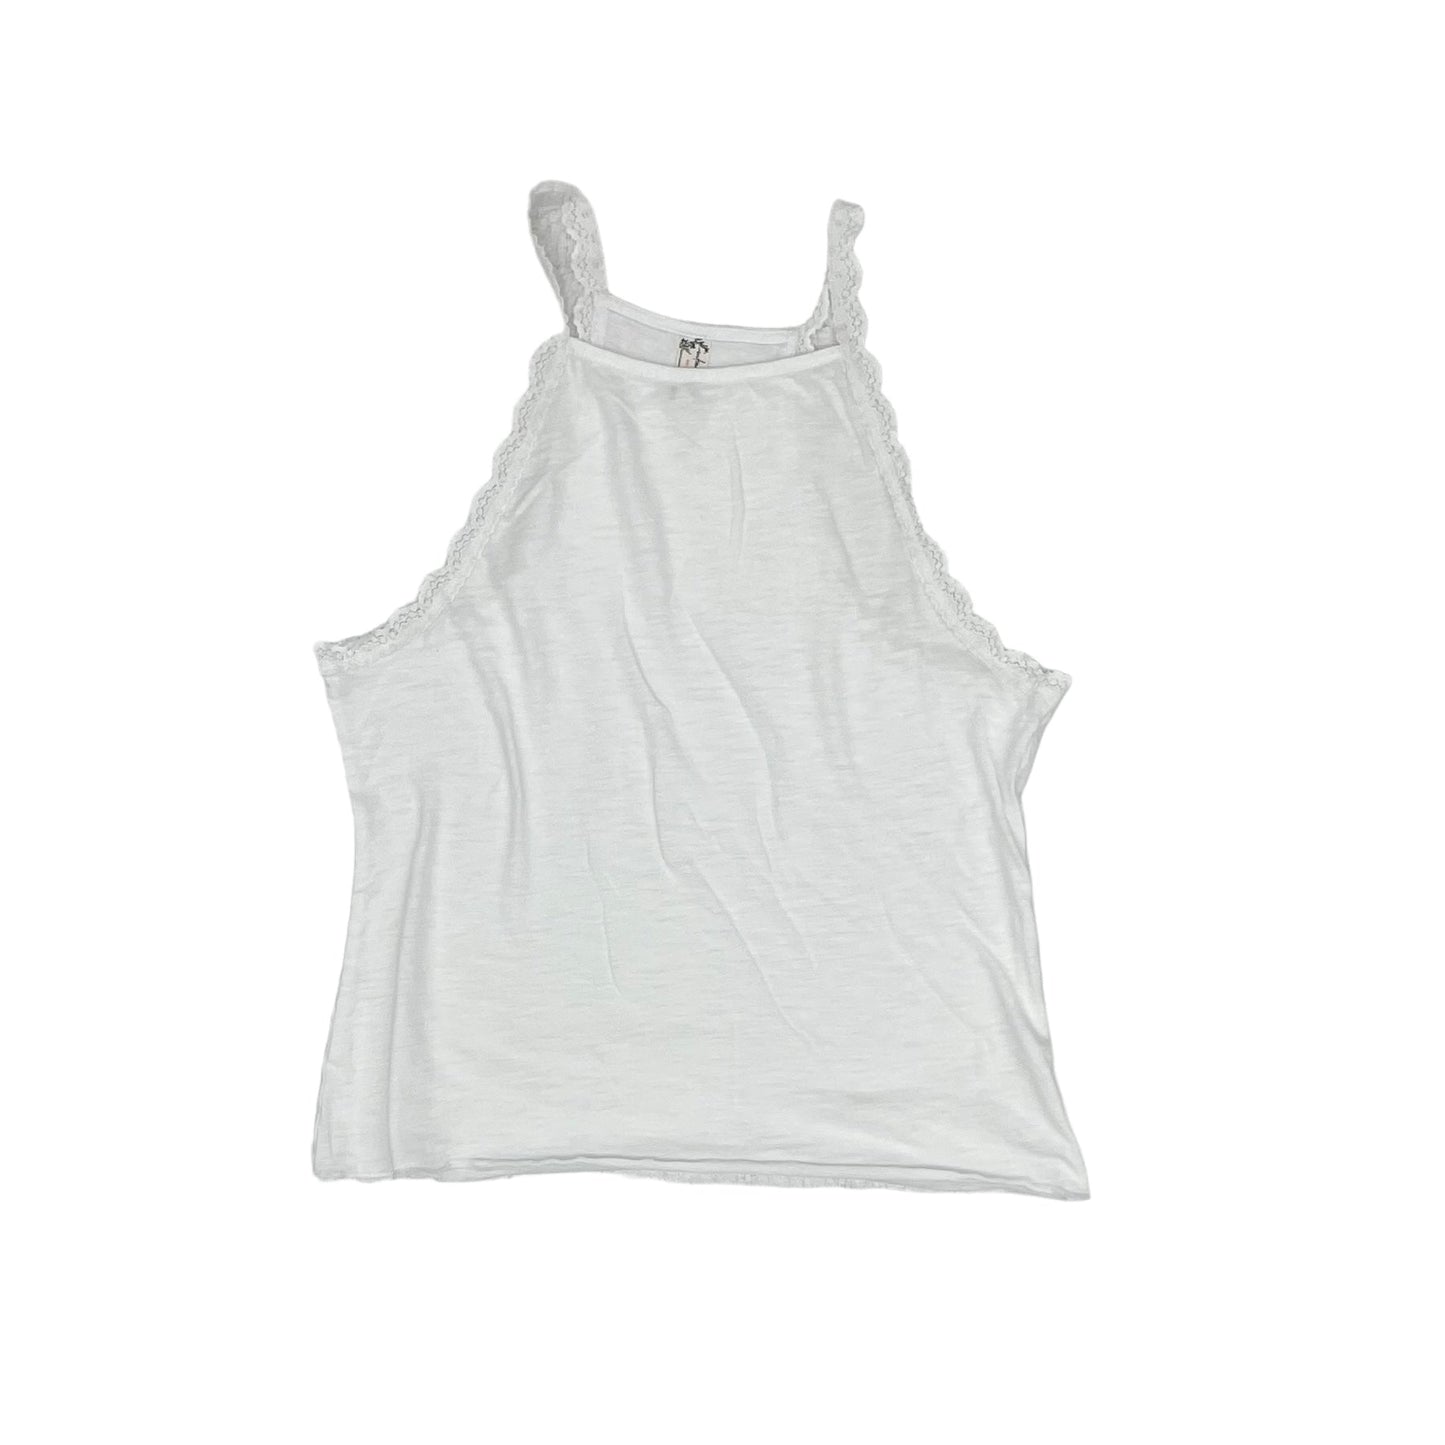 WHITE FREE PEOPLE TANK TOP, Size S